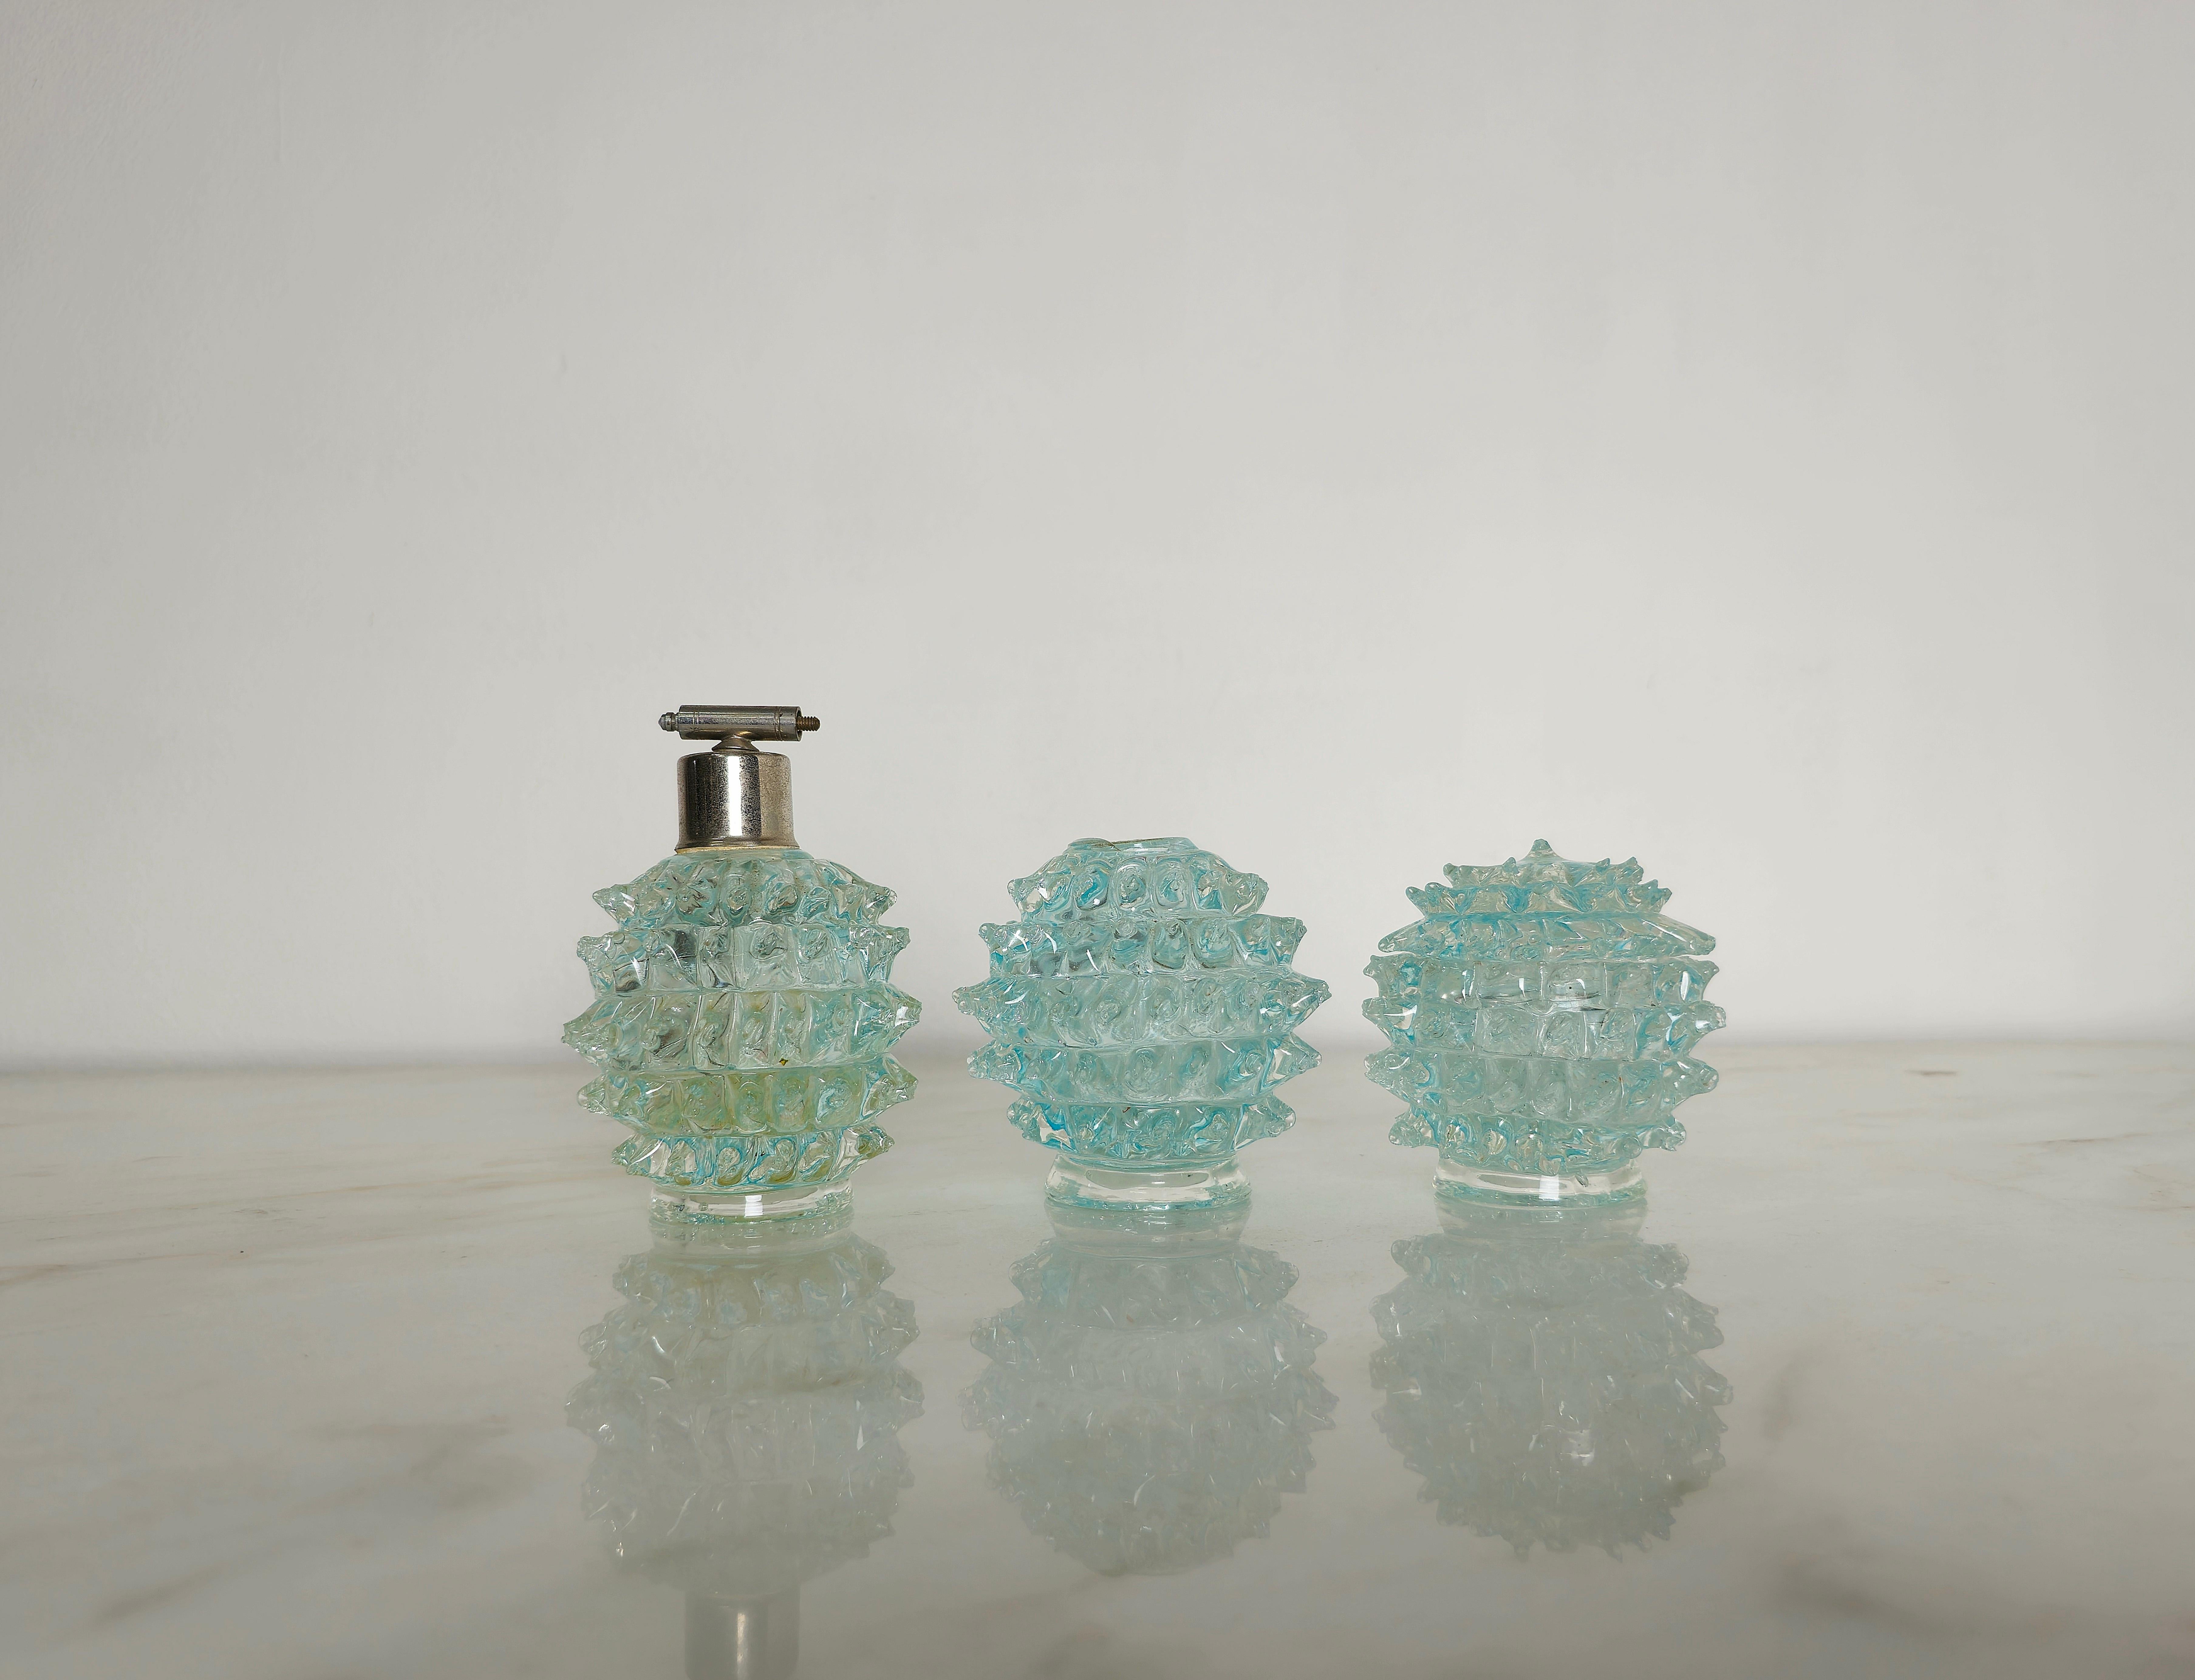 Set of 3 toiletries made in the 1940s by Barovier&Toso in rostrated Murano glass in shades of transparent and light blue.
We would like to point out that this set is sold only as a decorative or display object as it has lost its original